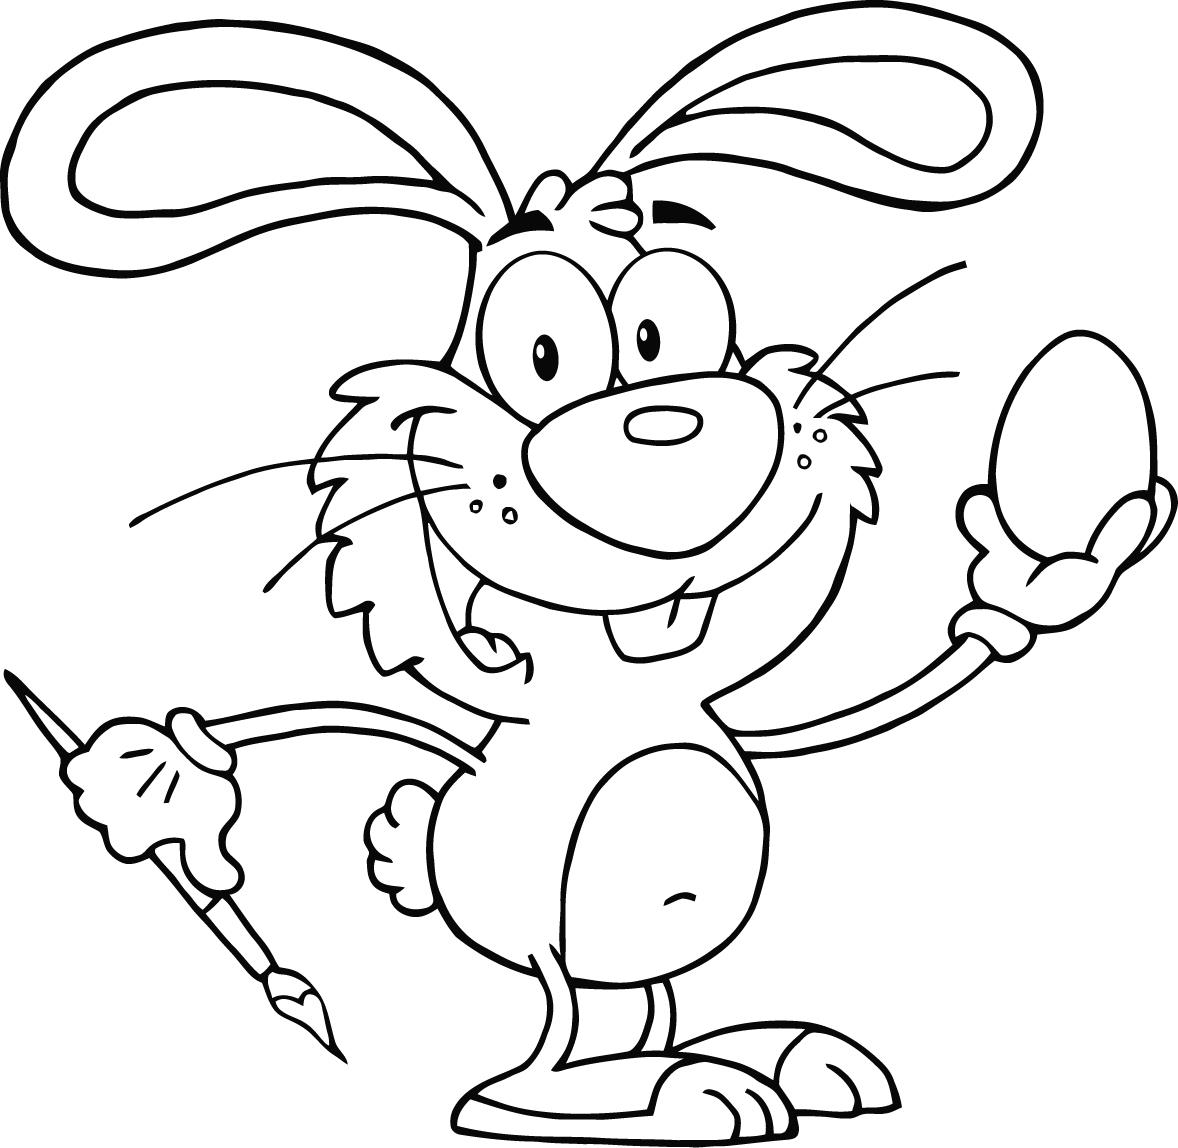 Bunny Coloring Pages Best Coloring Pages For Kids Coloring Wallpapers Download Free Images Wallpaper [coloring654.blogspot.com]